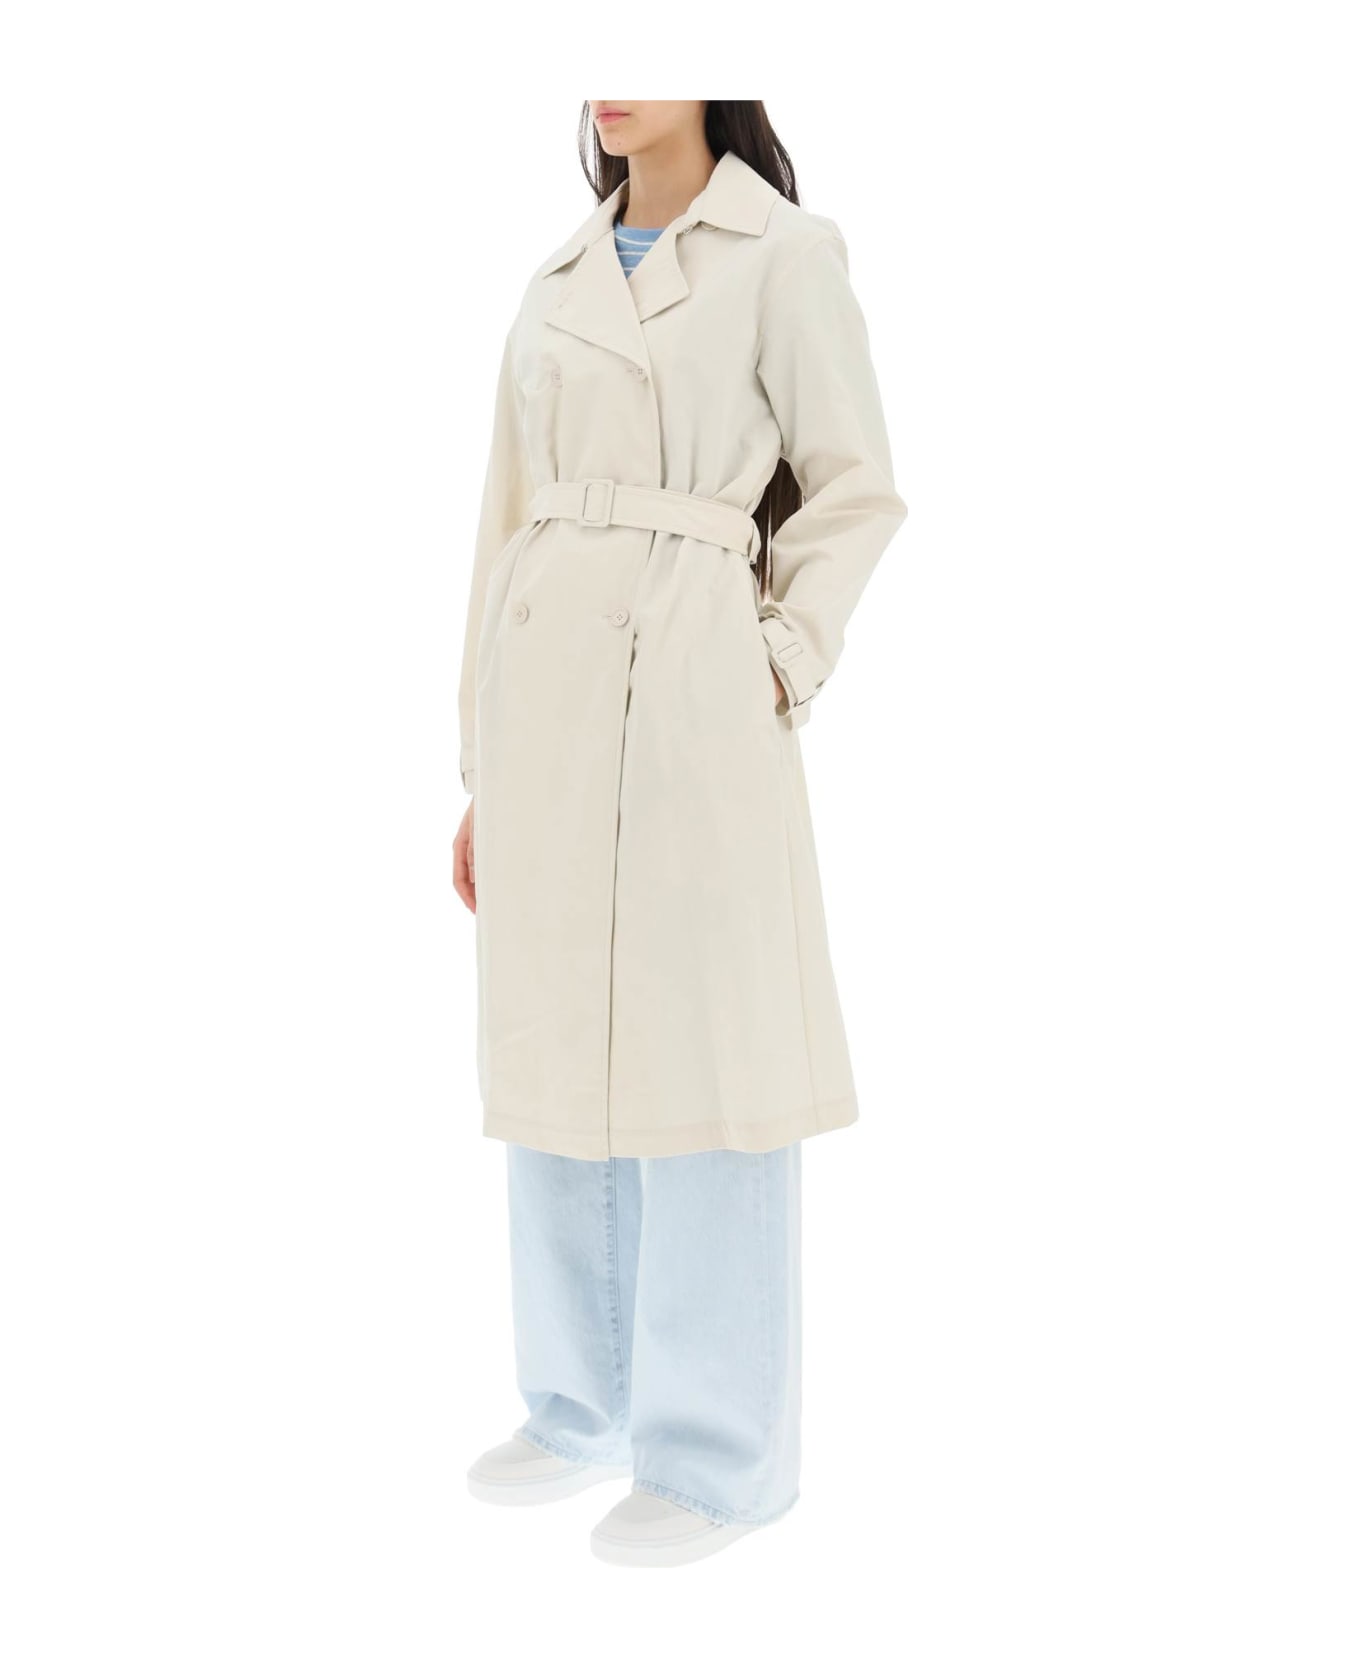 A.P.C. Double-breasted Trench Coat - Cream